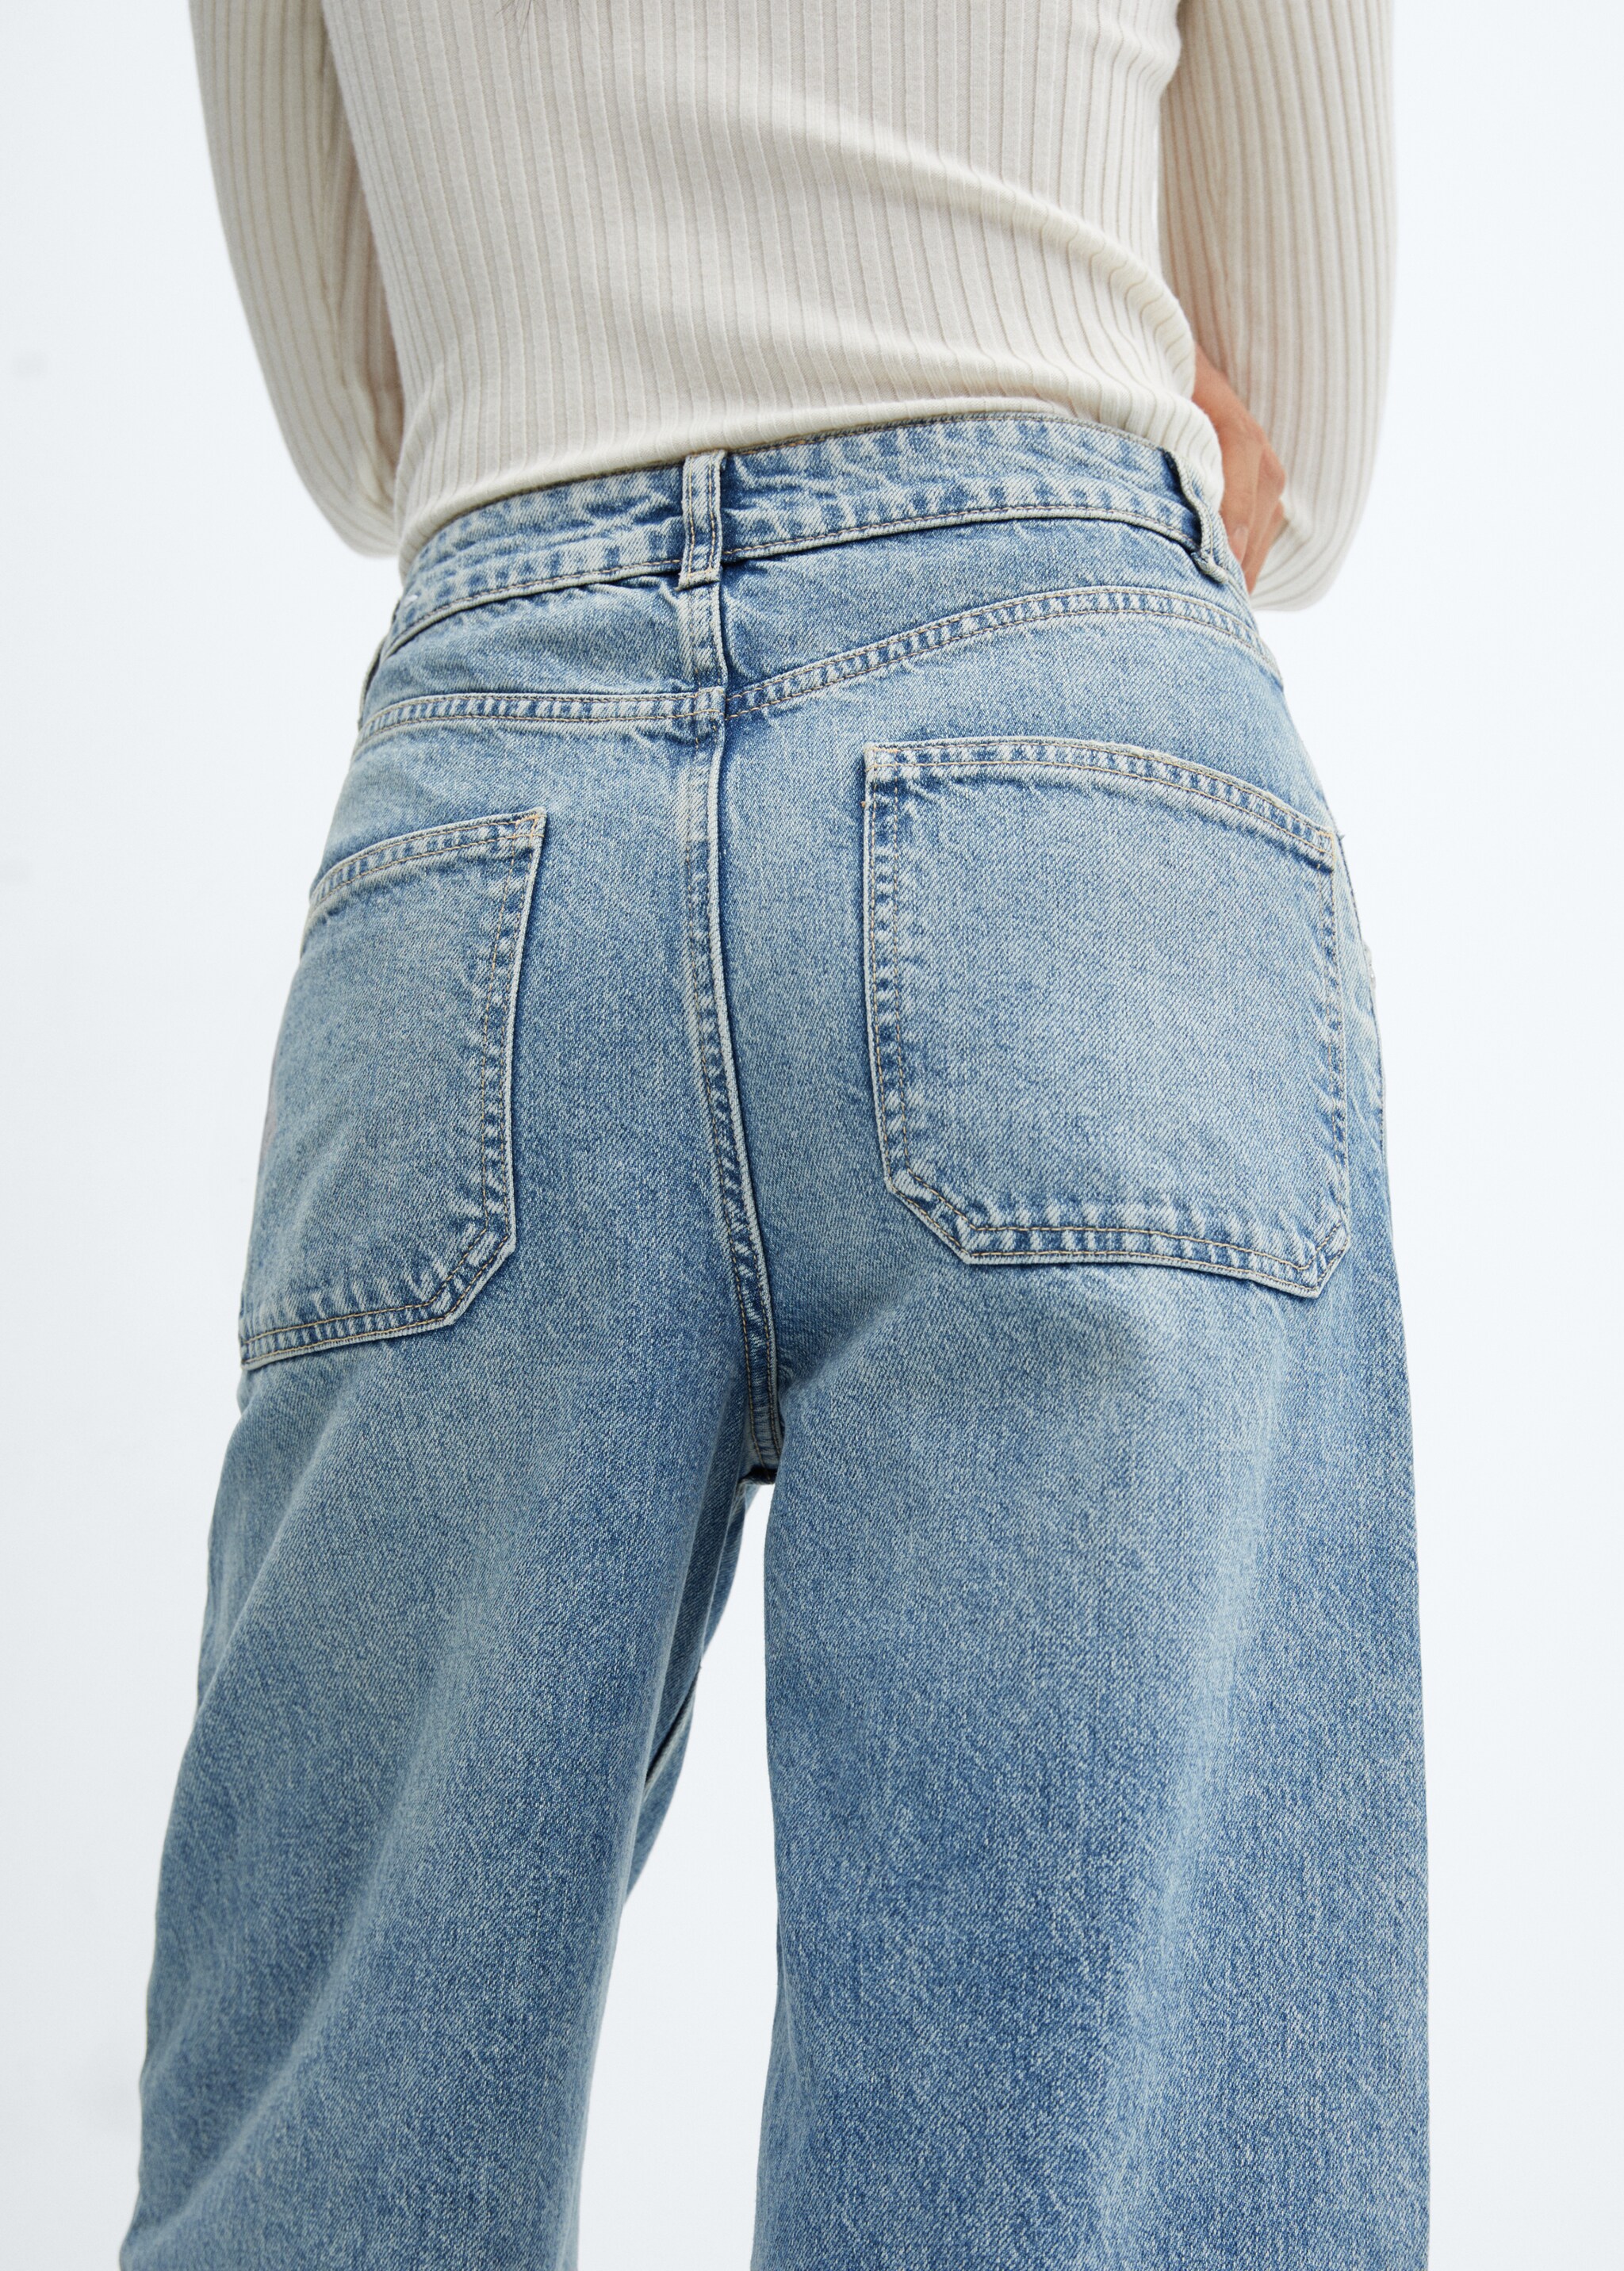 Jeans wideleg tiro medio - Details of the article 6